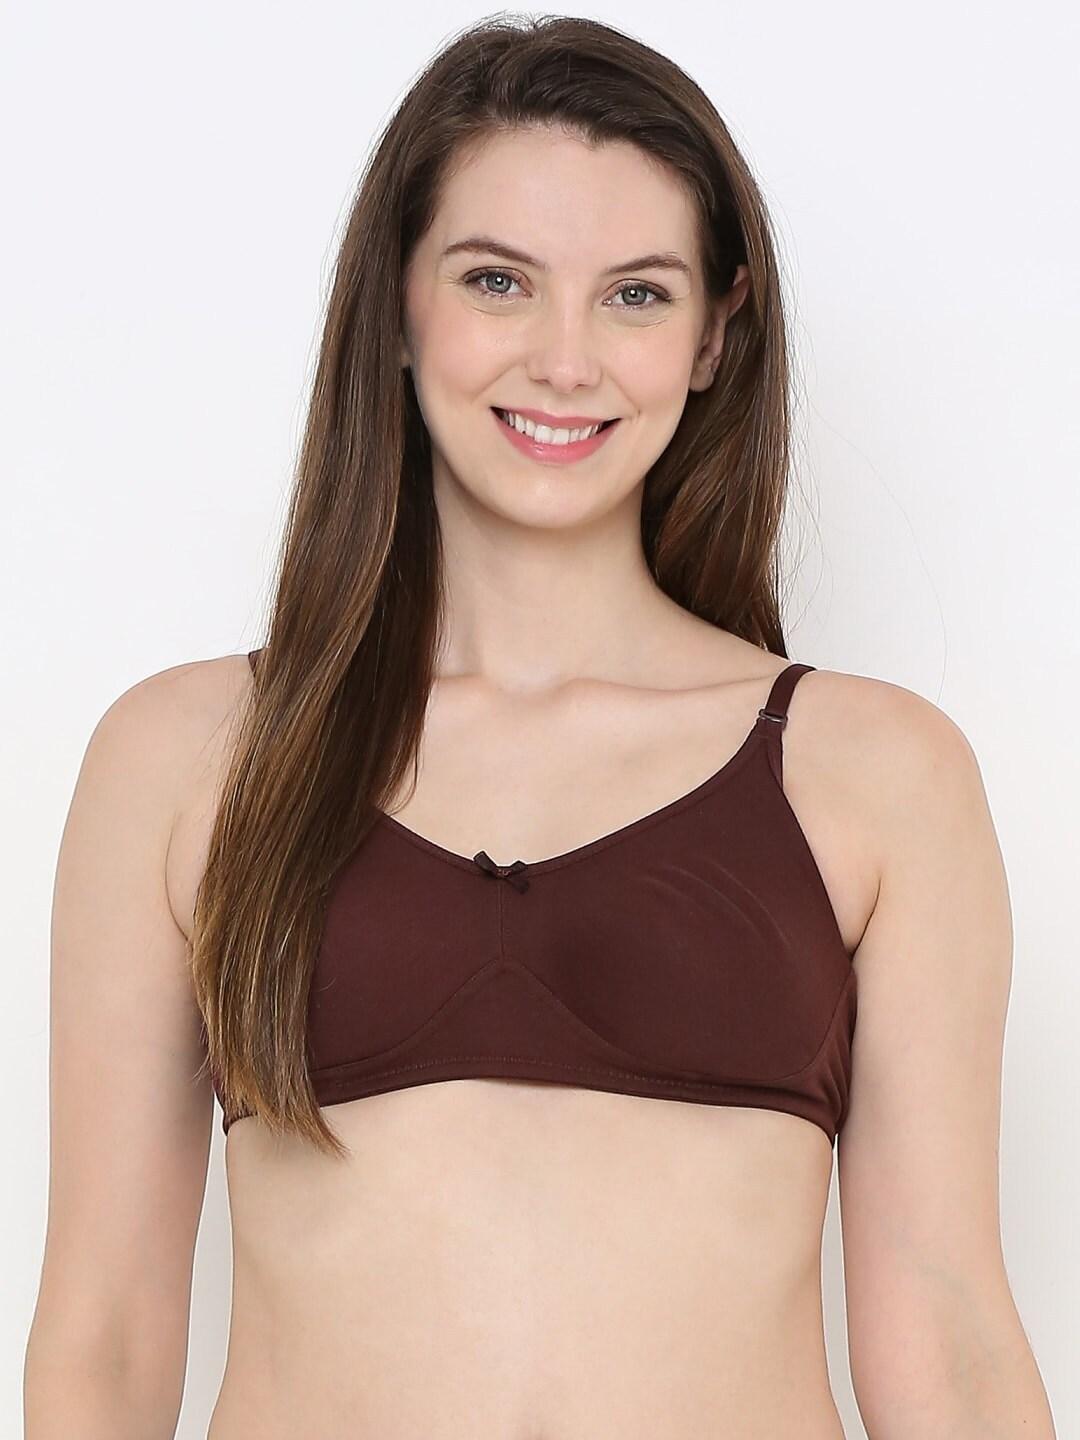 Berrys Intimatess Non-Wired & Non Padded All Day Comfort T-shirt Bra